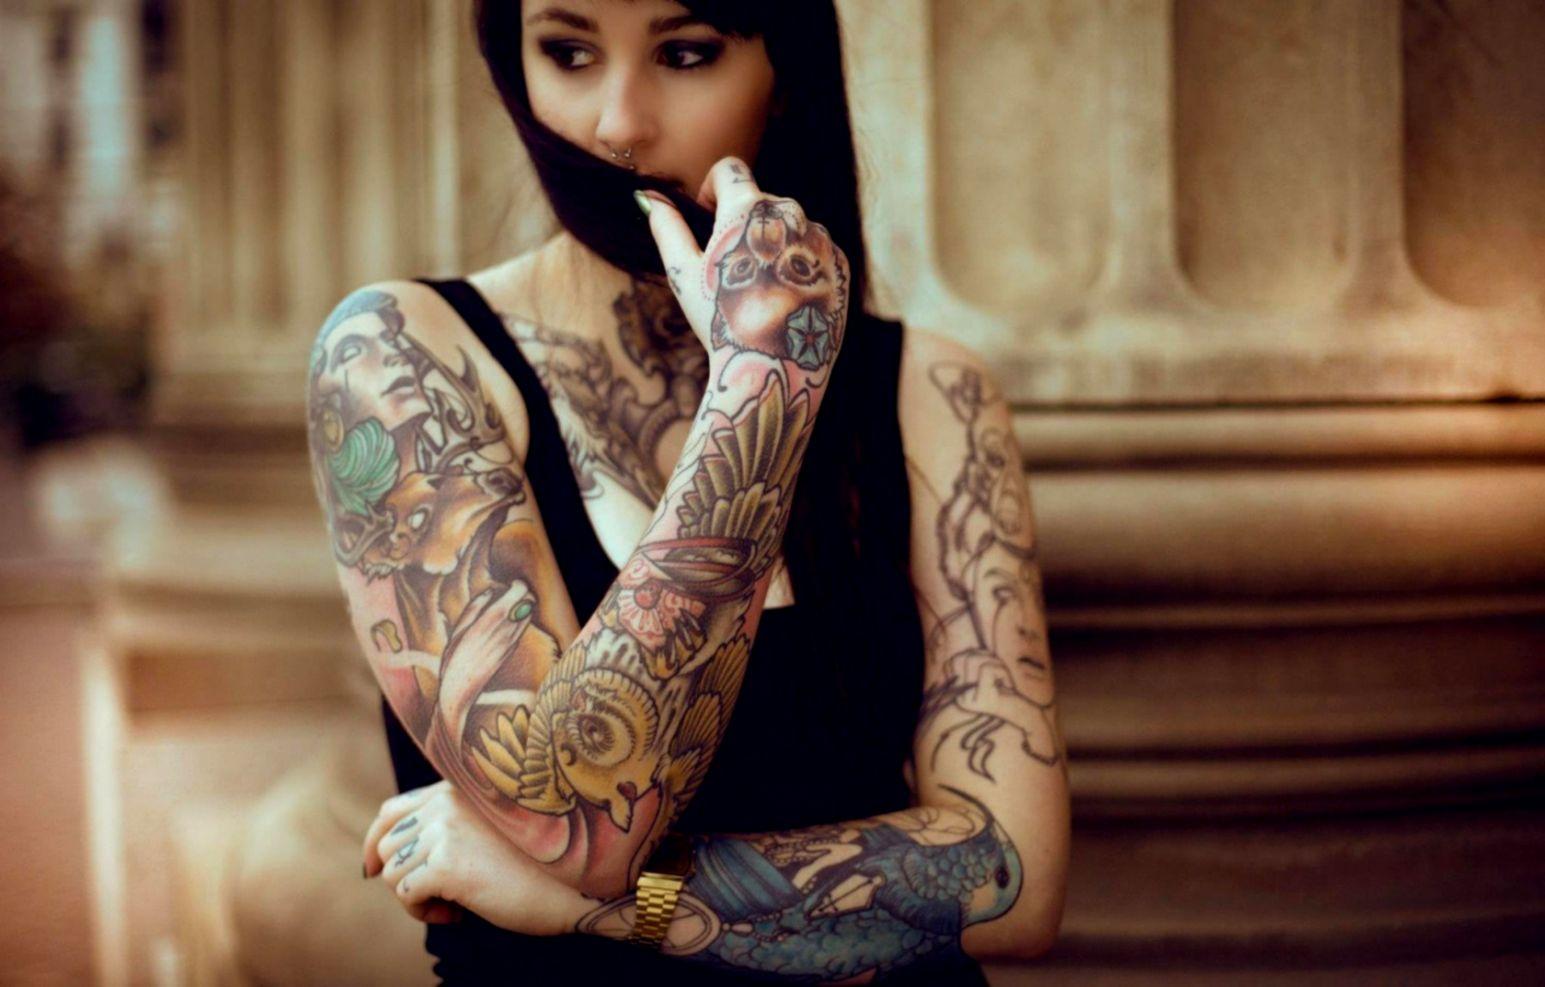 Tattoo 2019 Wallpapers - Wallpaper Cave